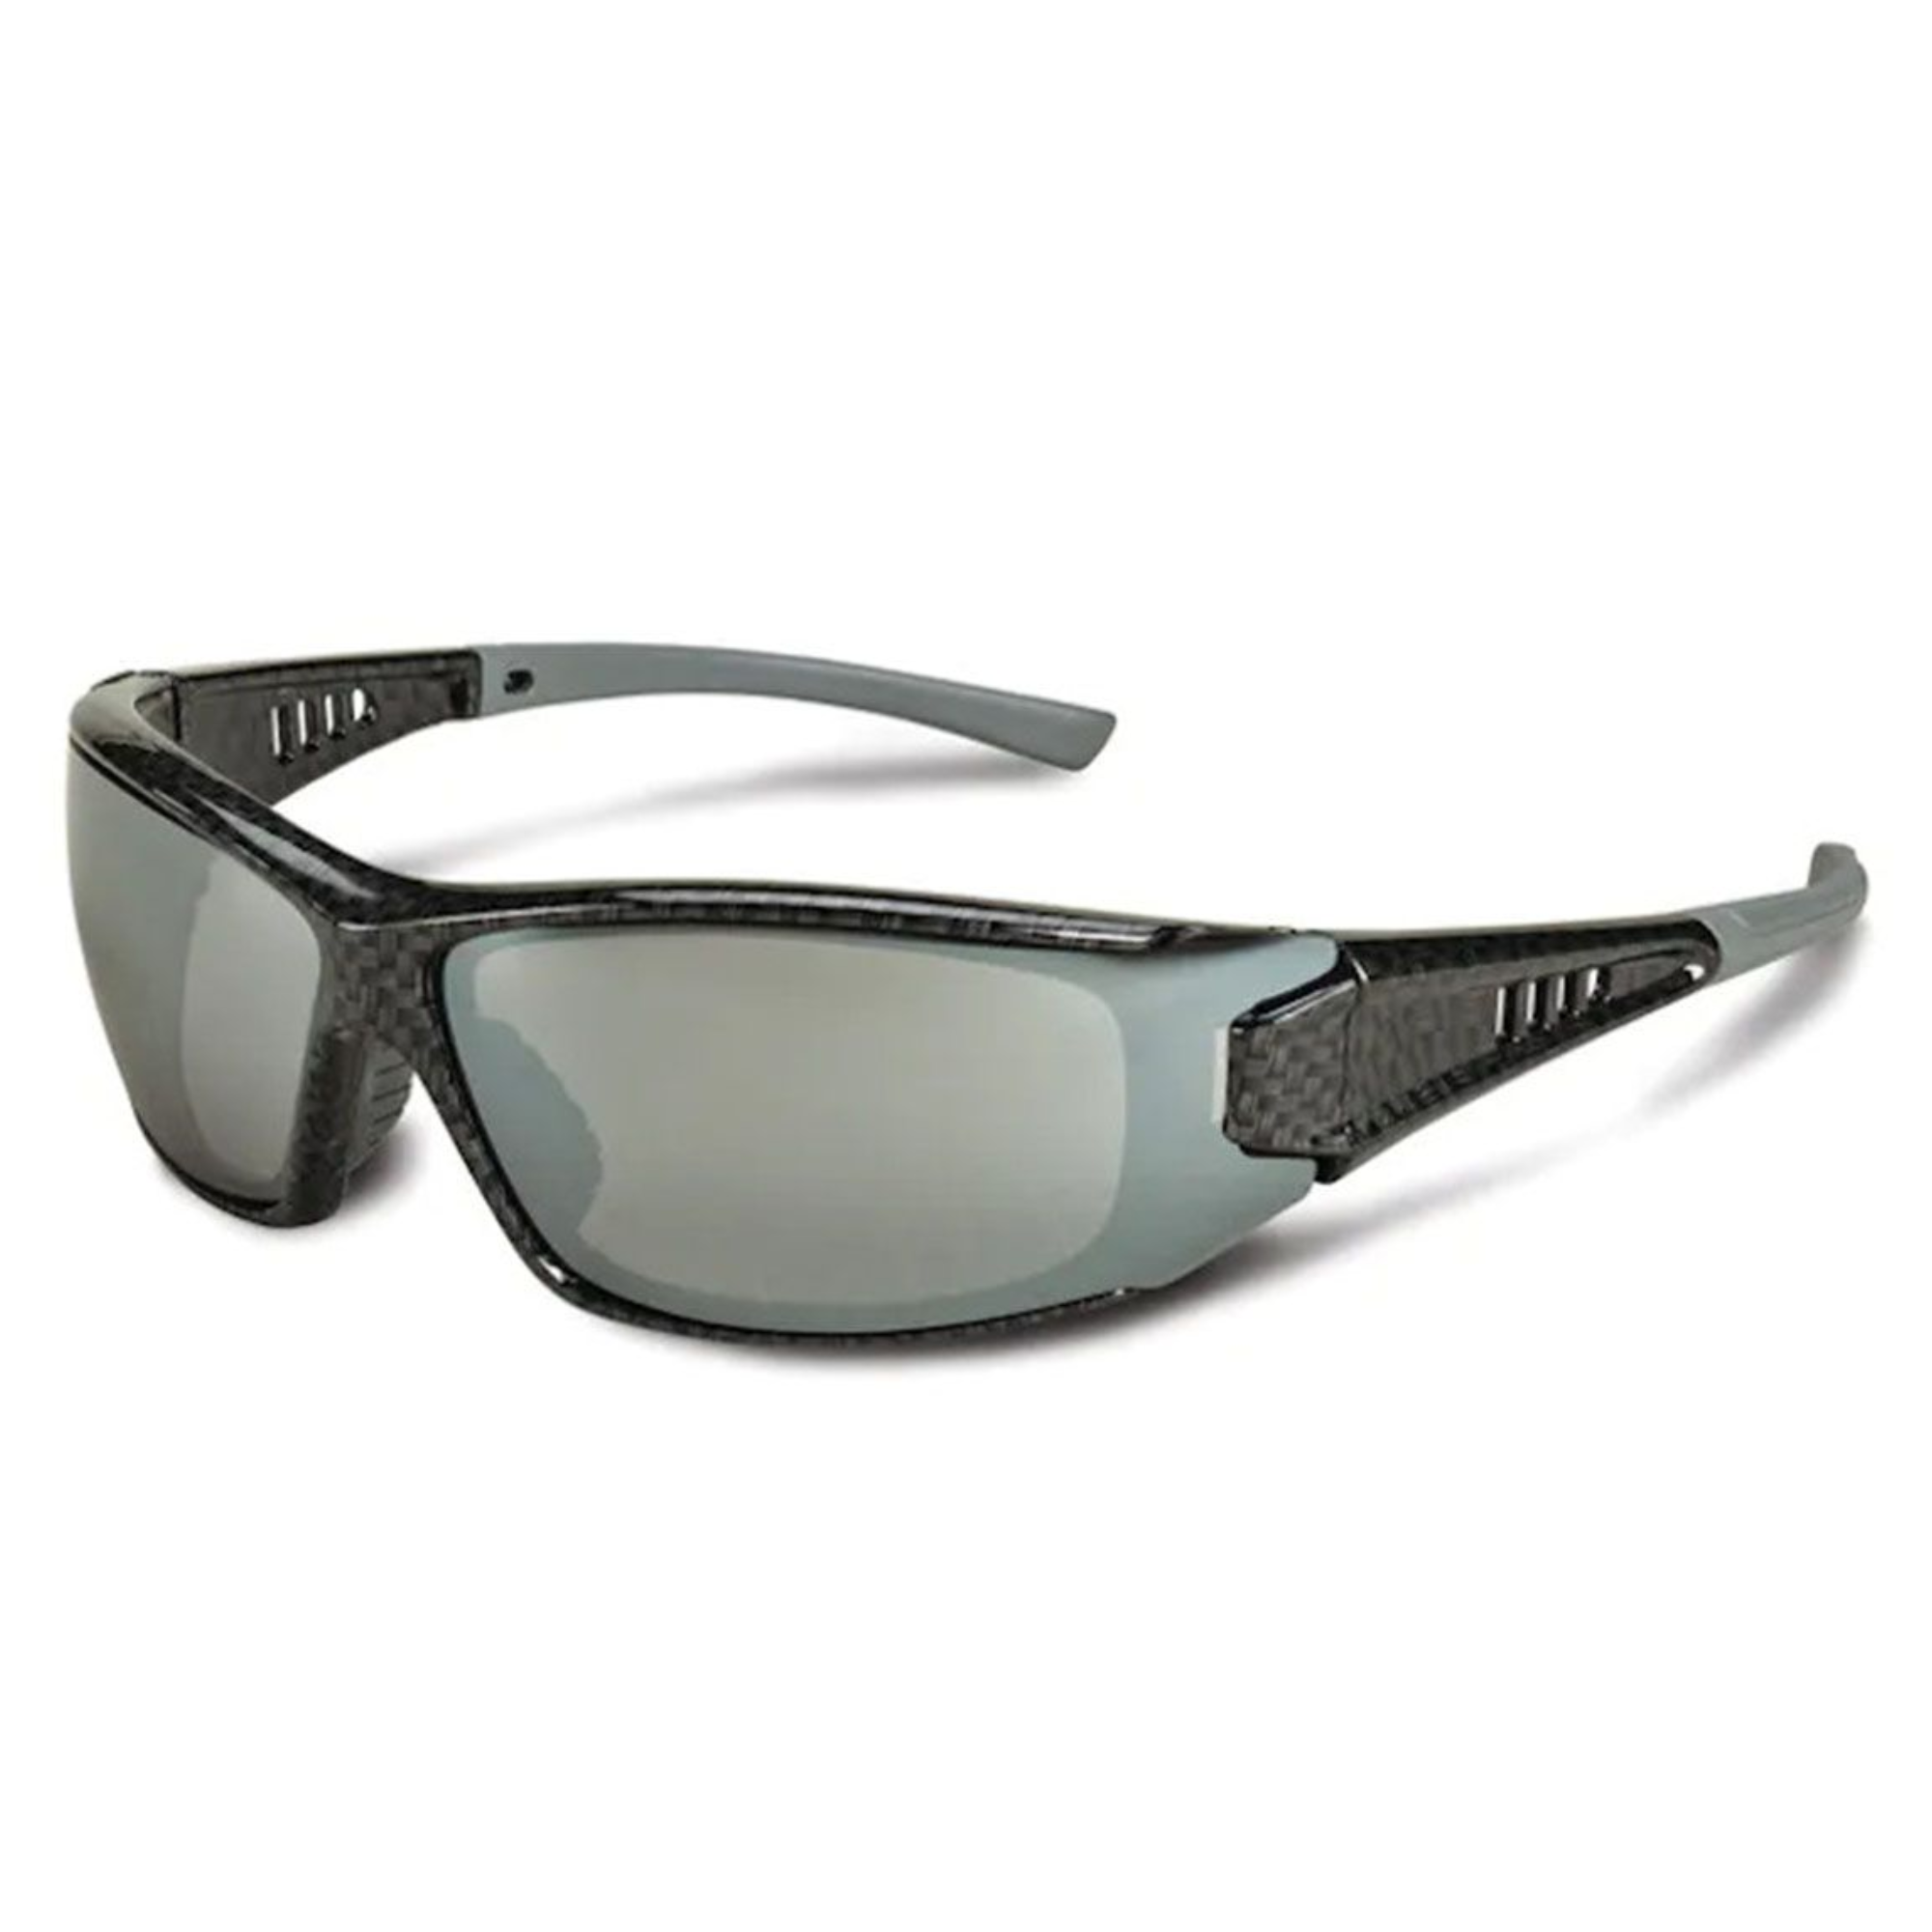 Stihl Patterned Glasses | Silver Mirror | 7010 884 0383